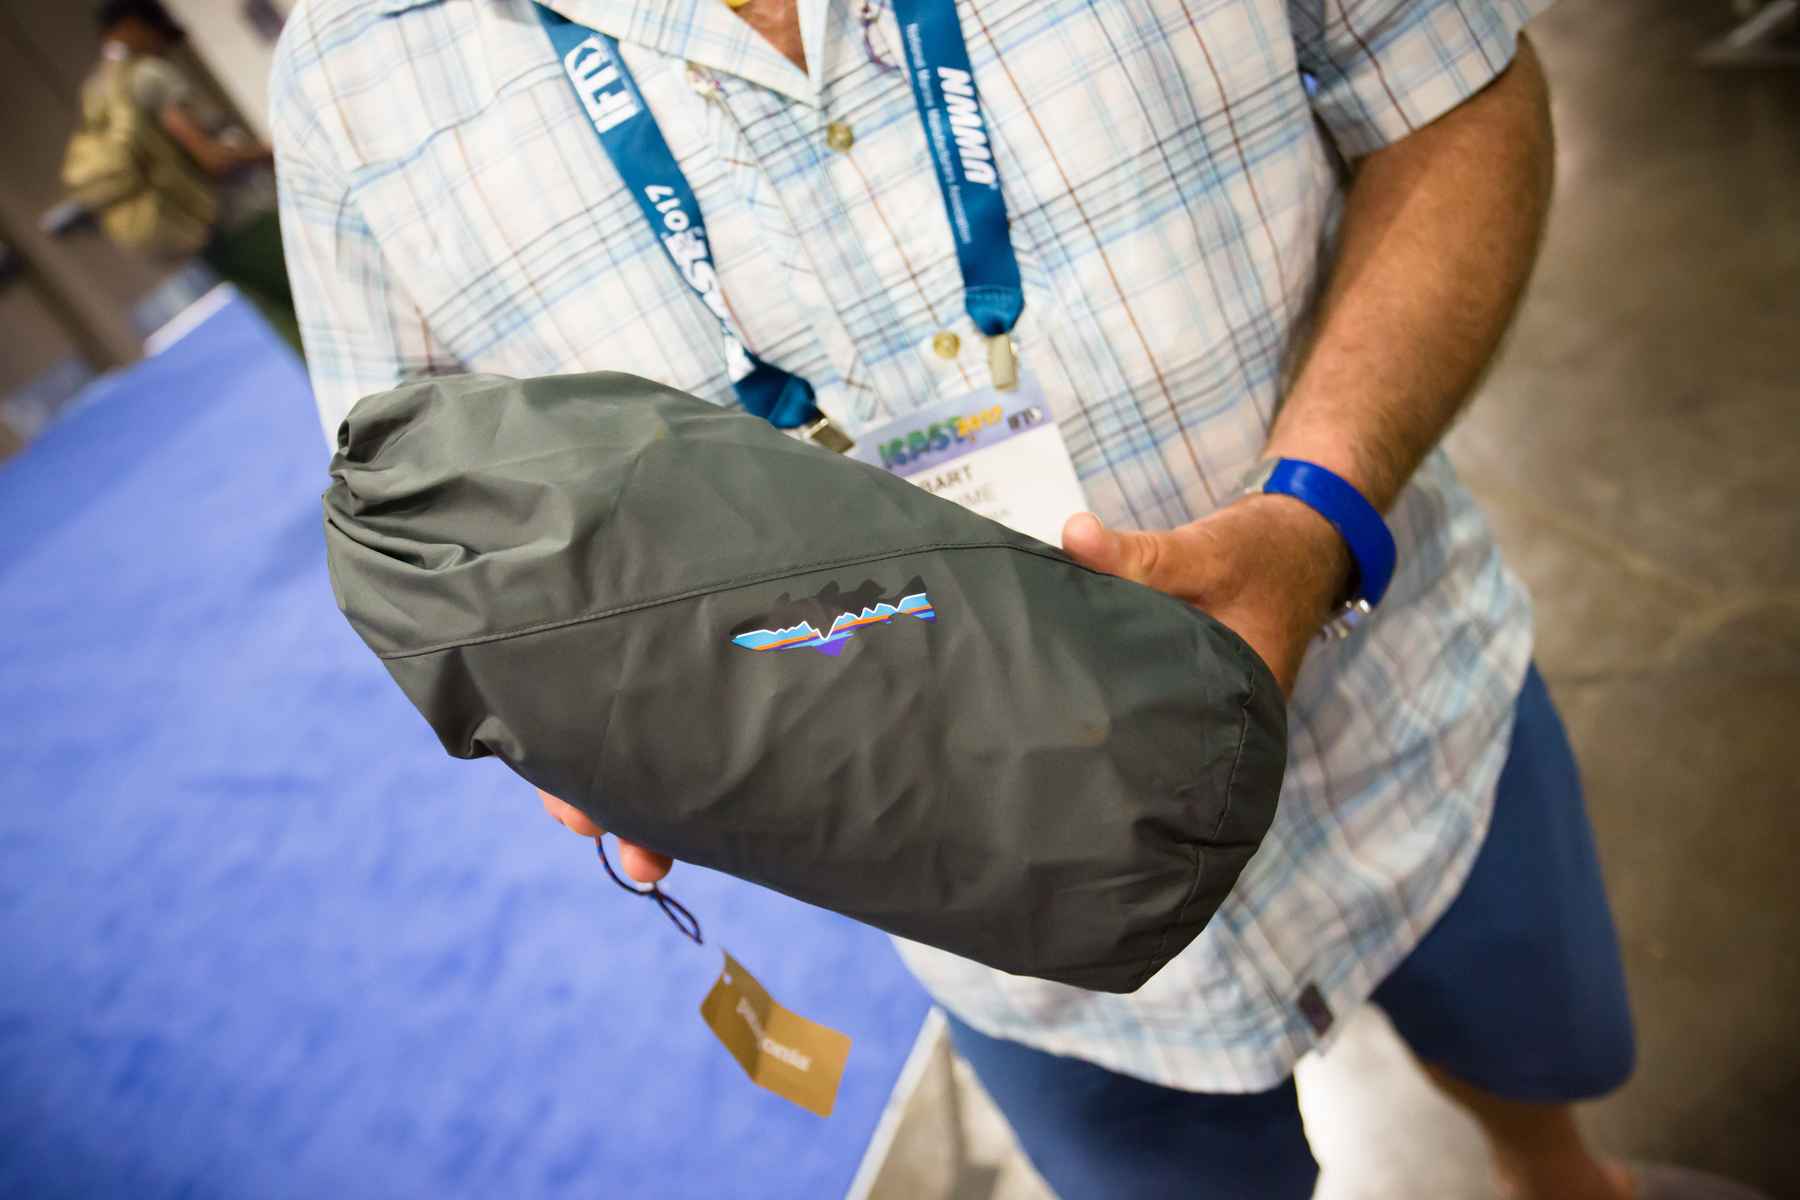 Patagonia's new wader fits in a seriously small bag | Hatch